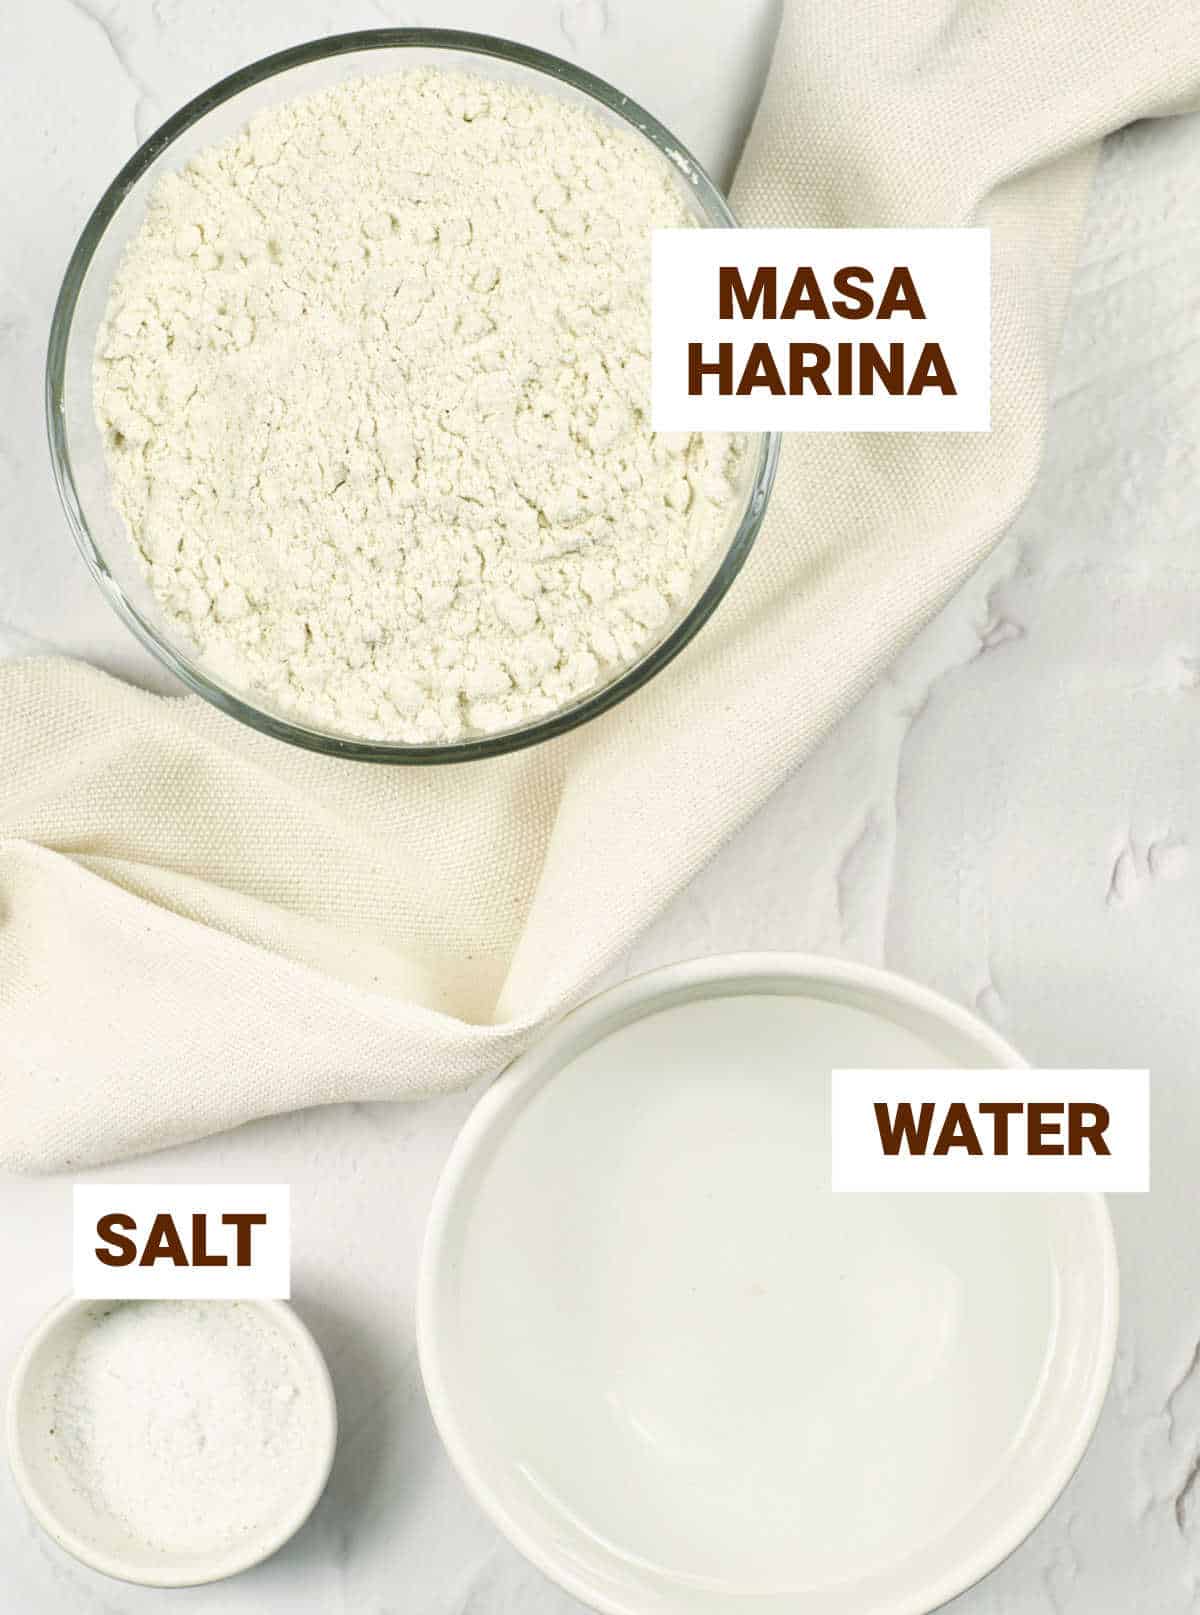 White surface with a kitchen towel and bowls containing masa harina, salt, and water.